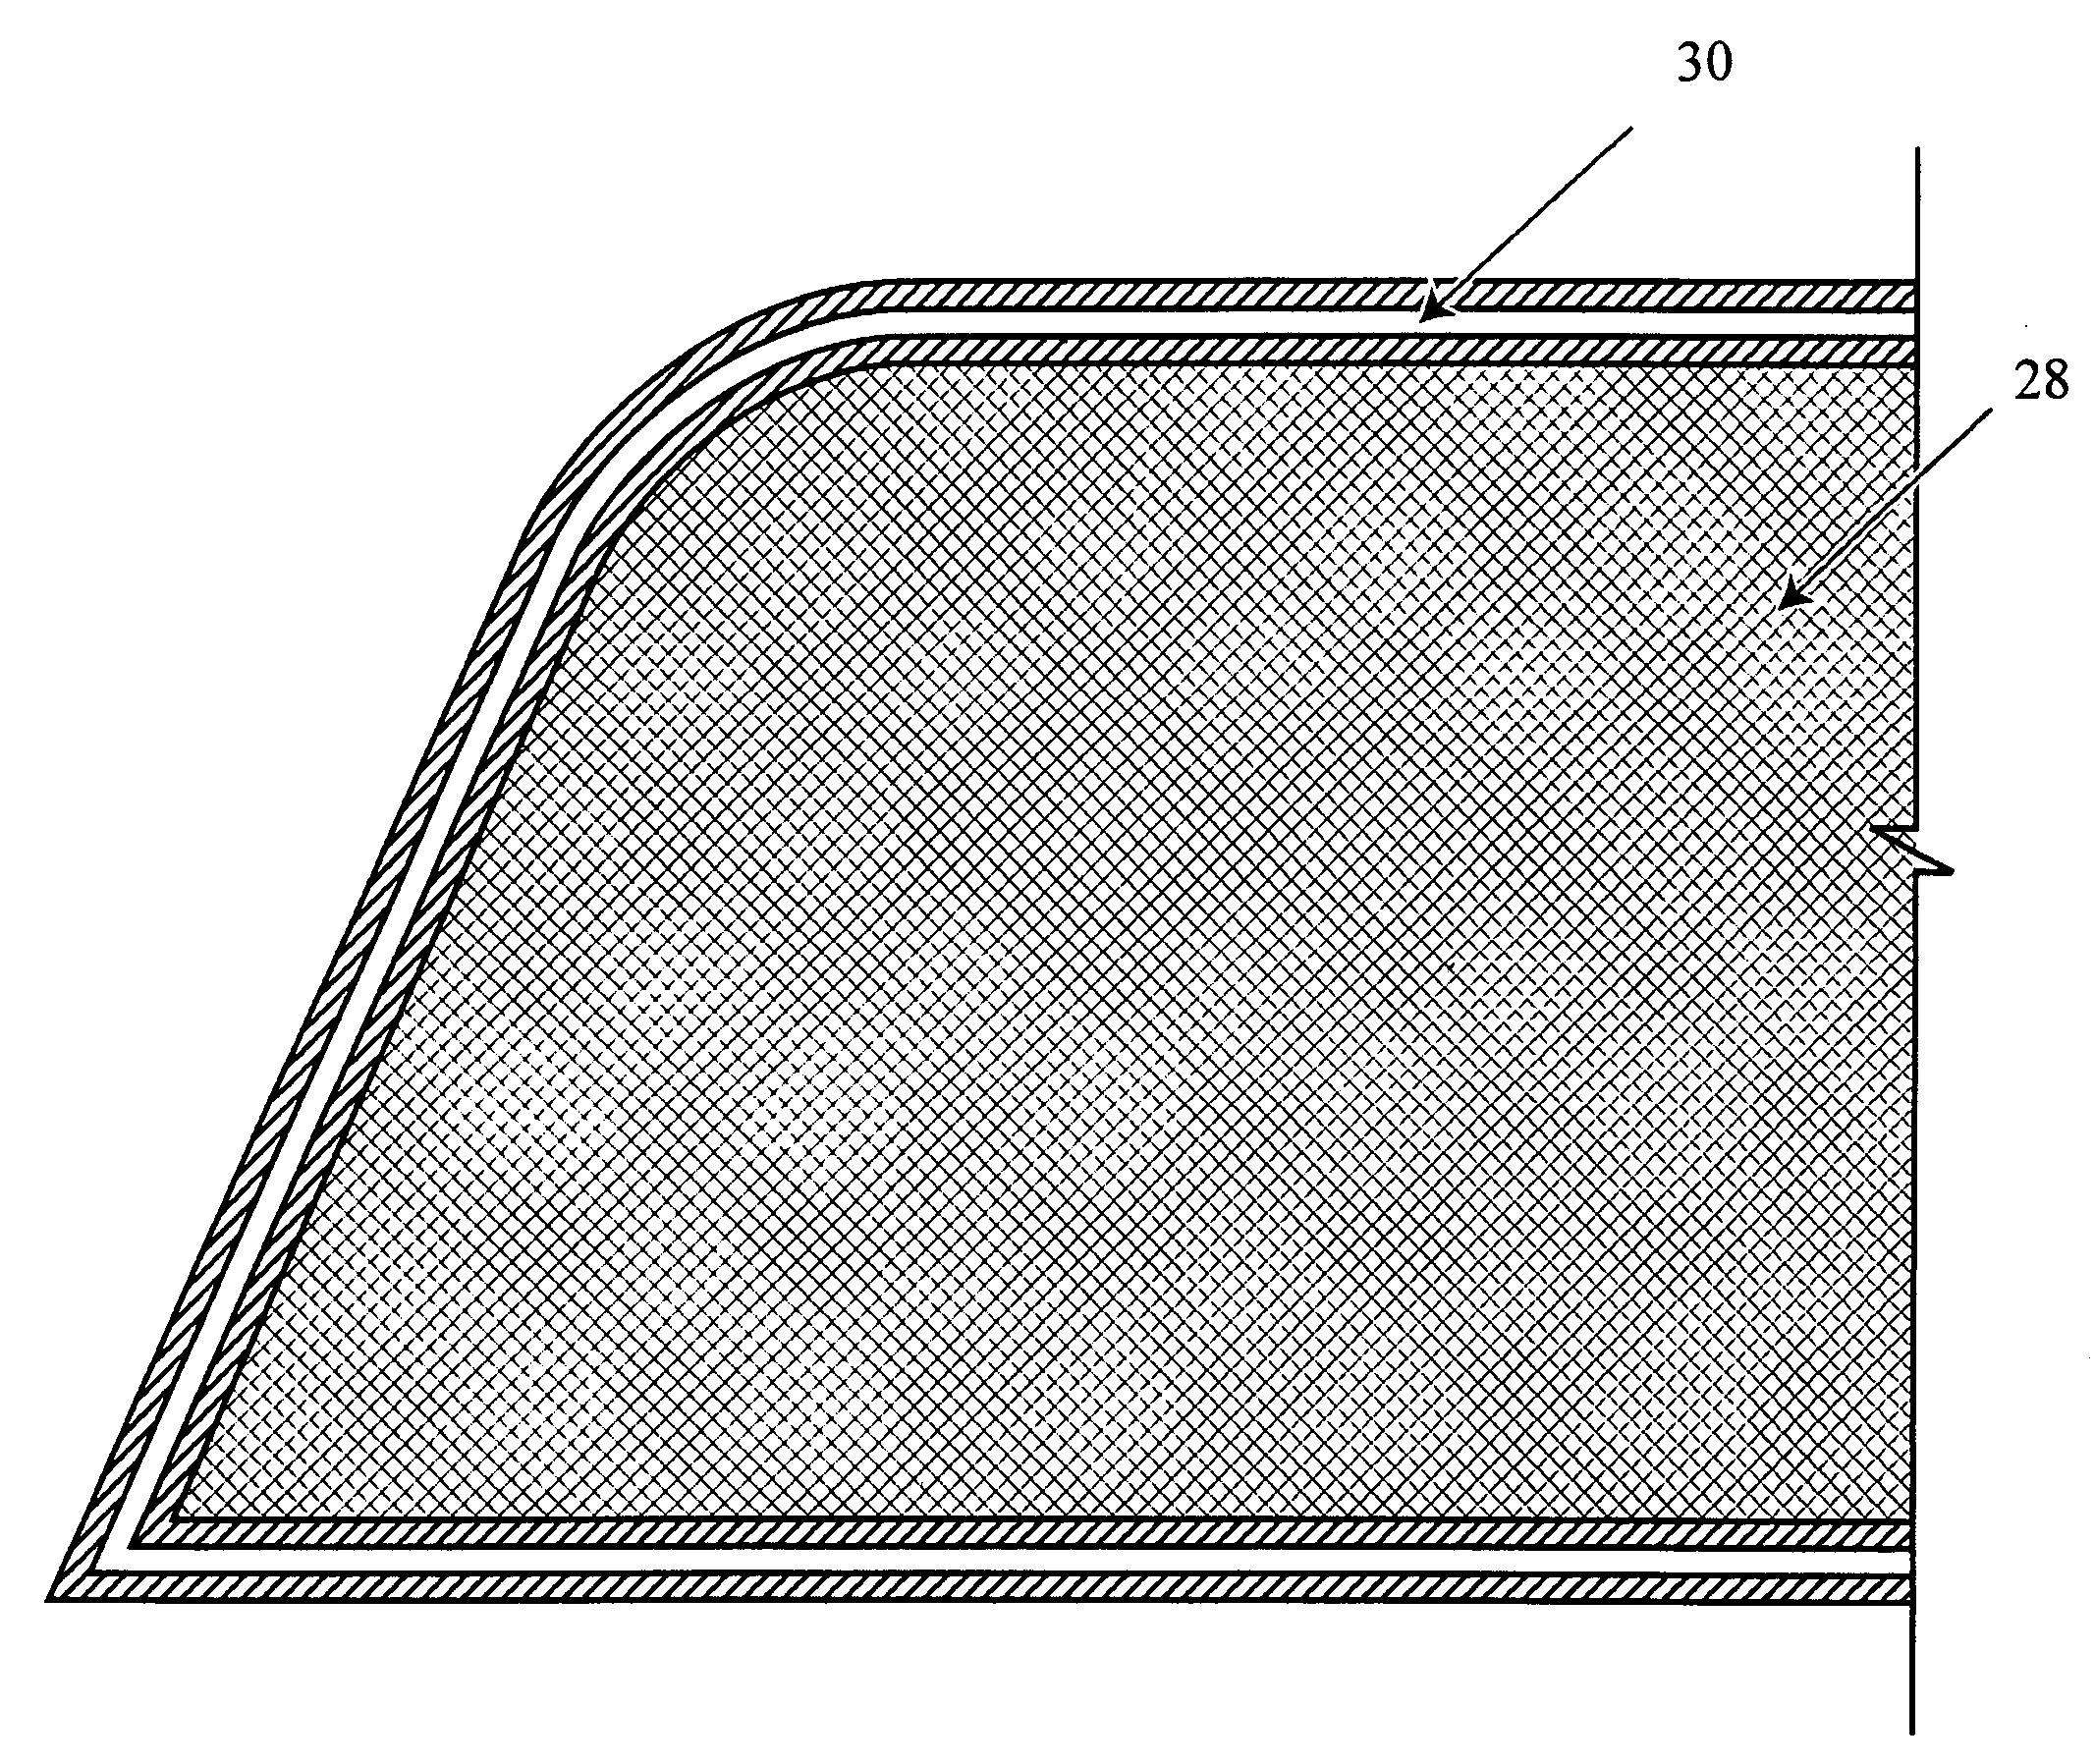 Wear resistant vapor deposited coating, method of coating deposition and applications therefor